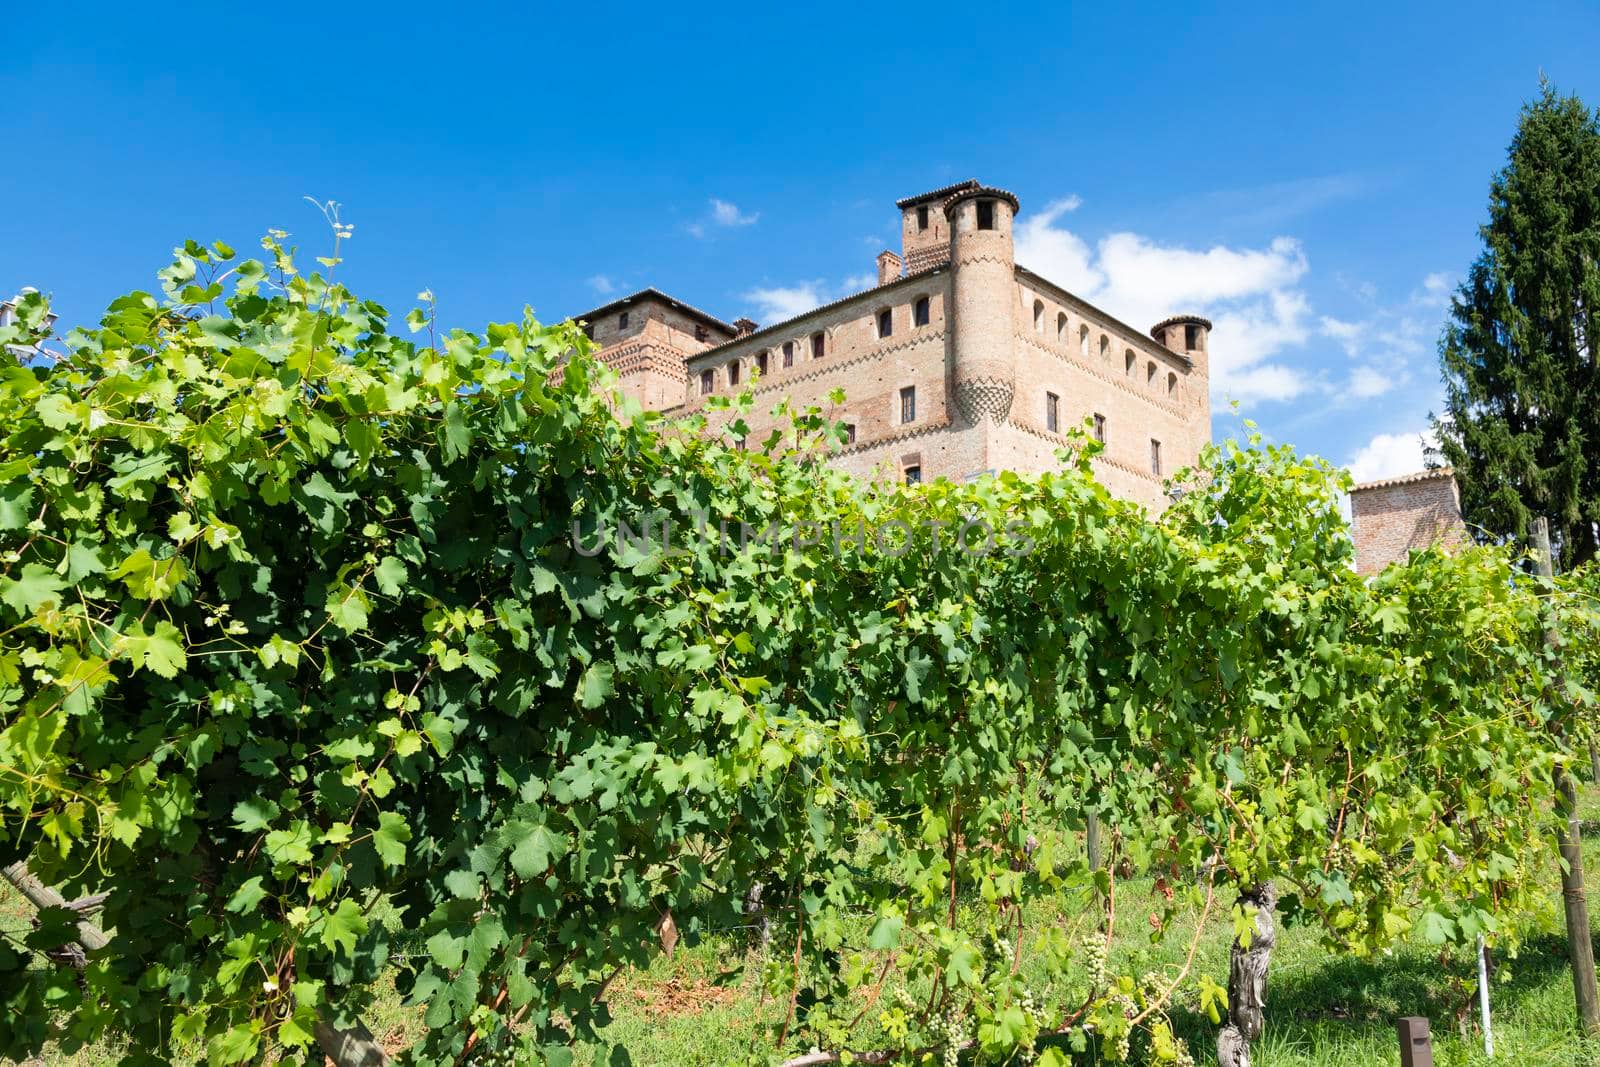 Vineyard in Piedmont Region, Italy, with Grinzane Cavour castle in the background by Perseomedusa